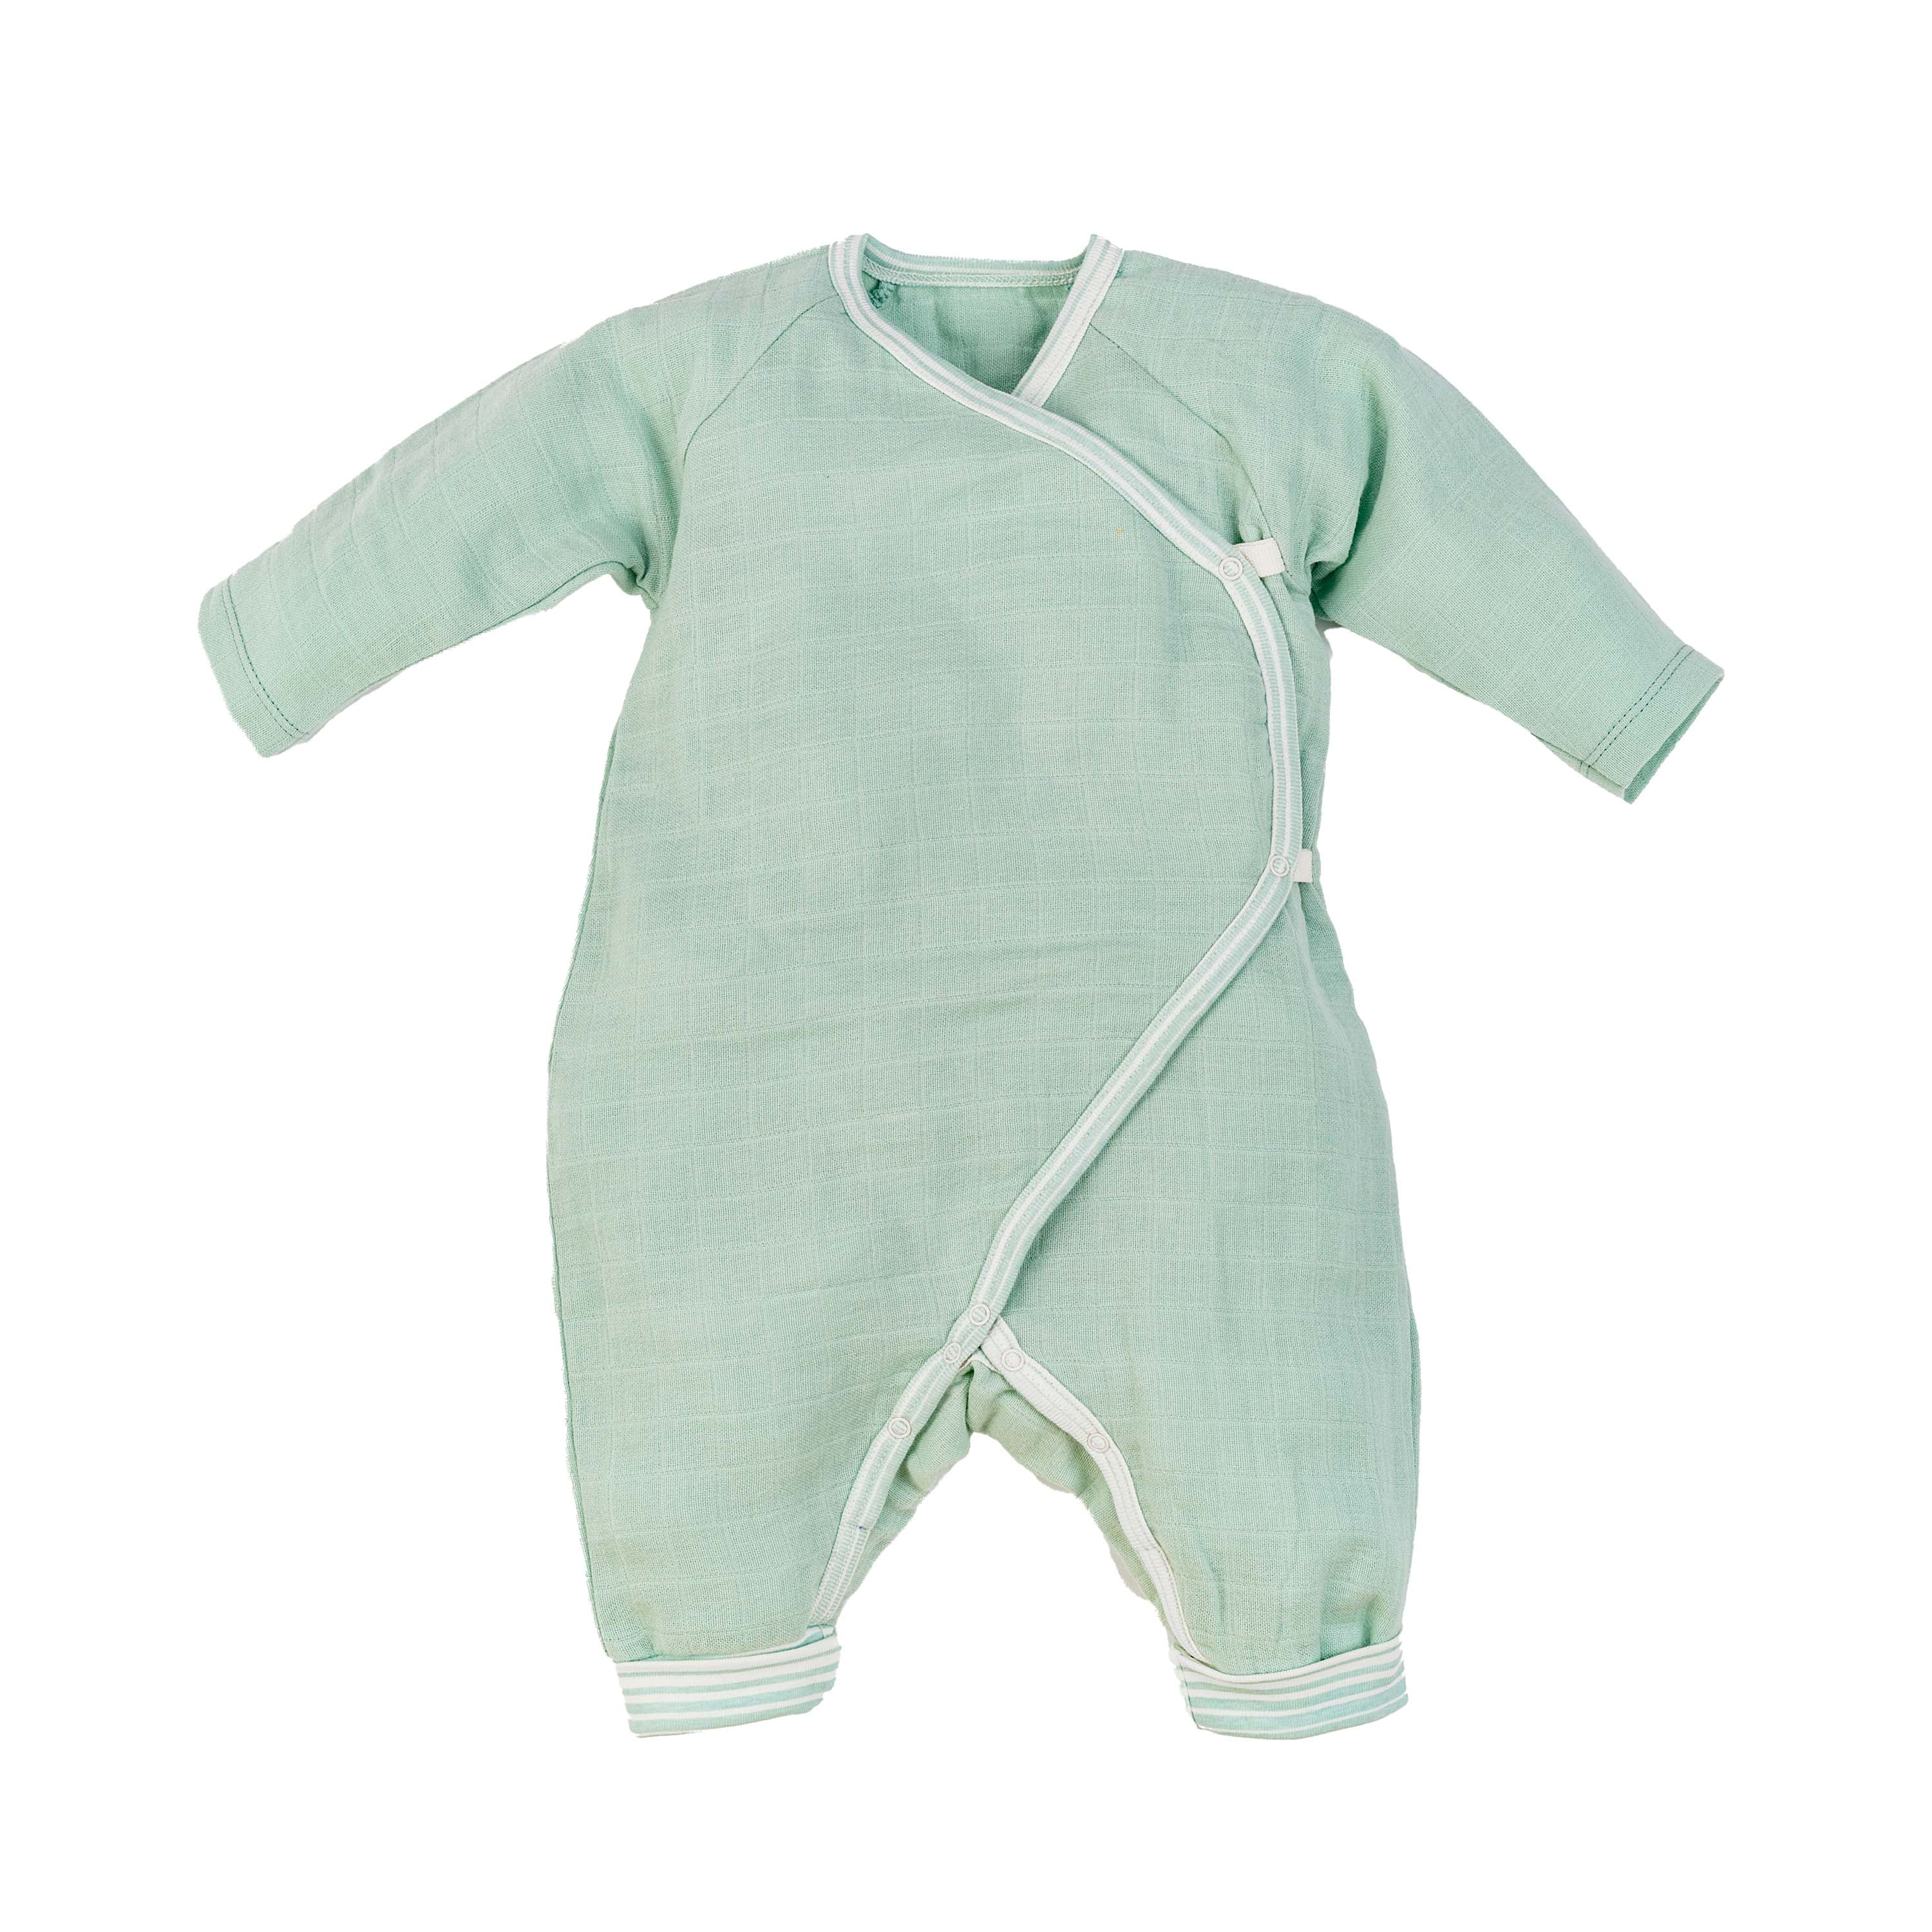 Size 0 to 3 Months Under the Nile Organic Cotton Baby Muslin Side Snap Kimono in Sea Breeze Ombre Stripe 